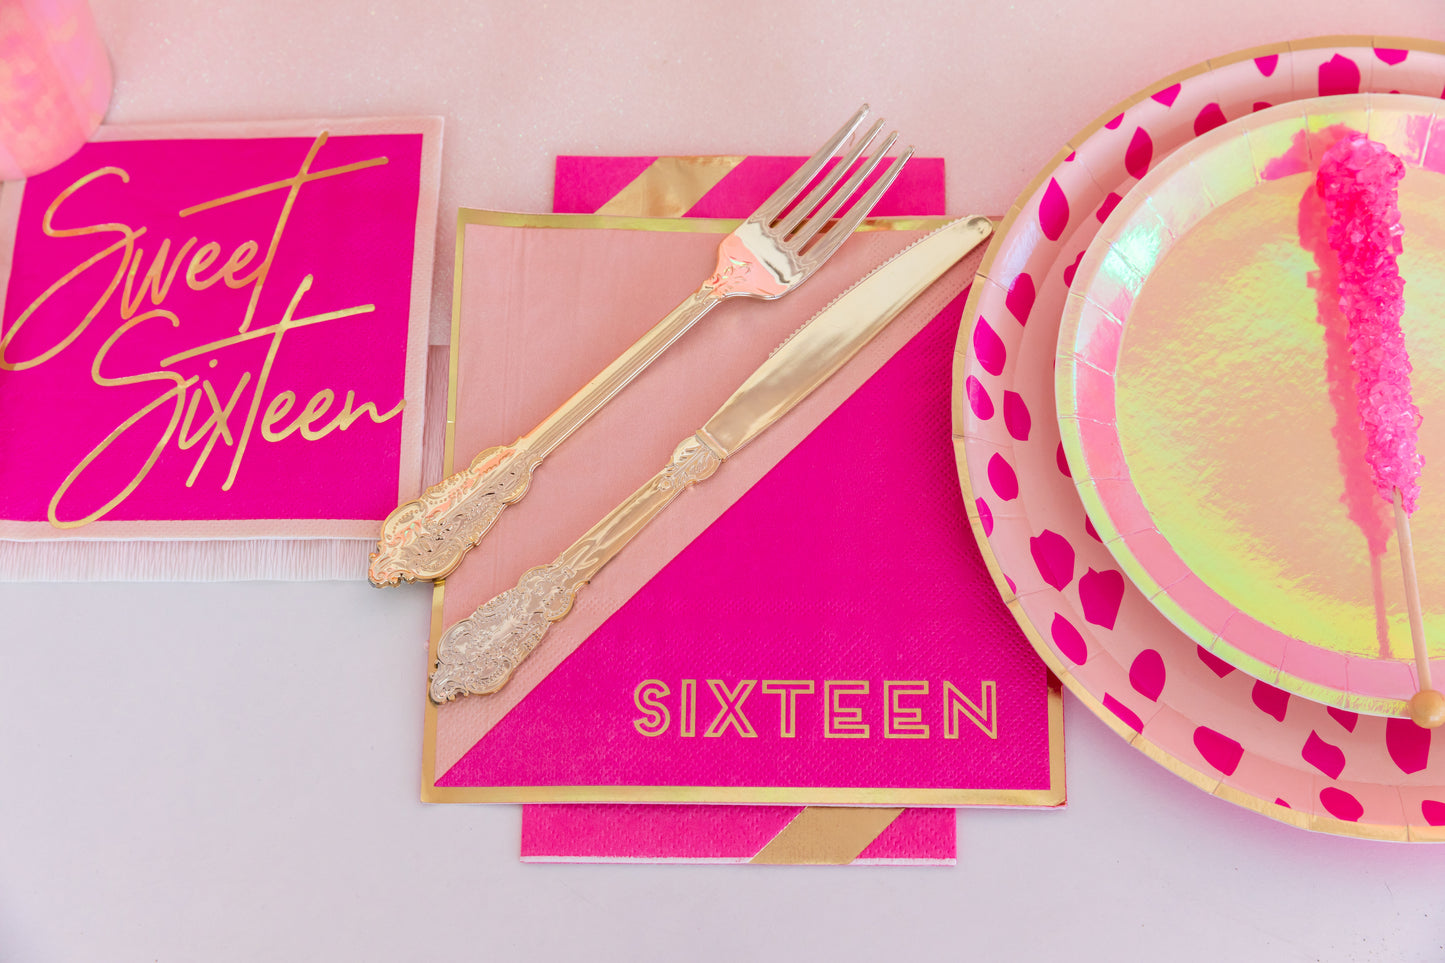 sweet sixteen party decor with napkins, plates and cutlery